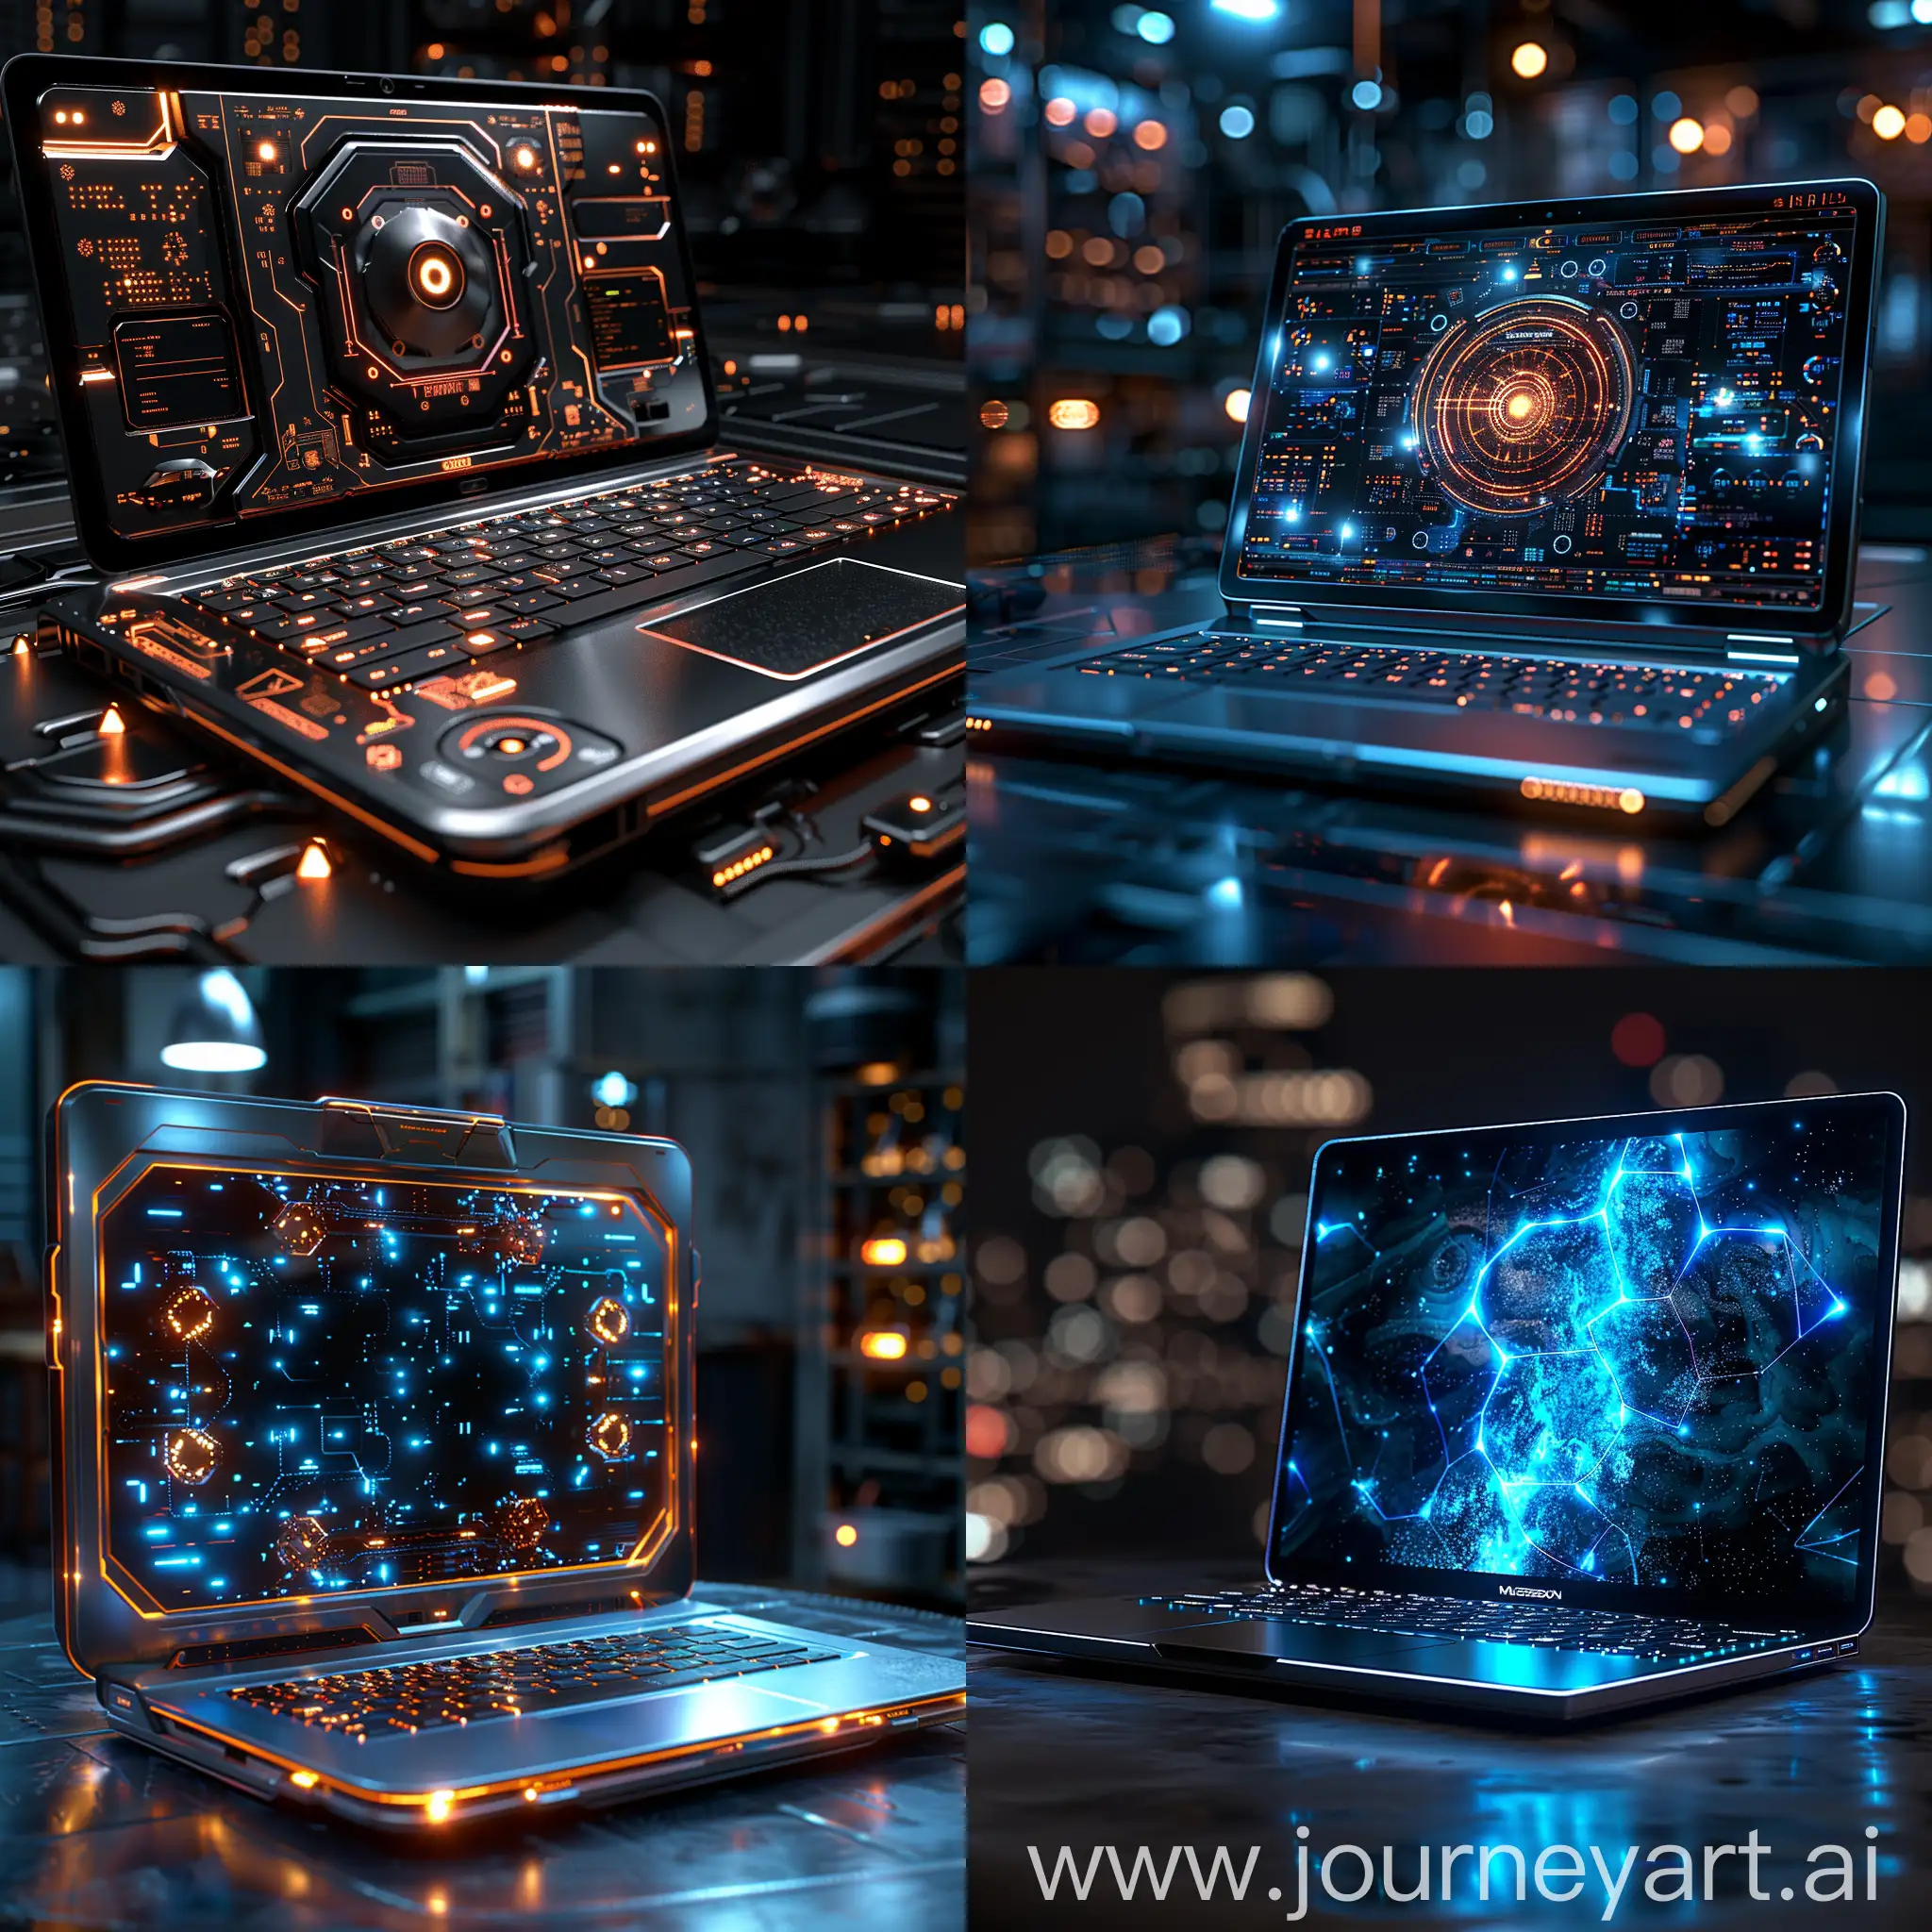 Futuristic-Stainless-Steel-Laptop-with-Cybernetic-Elements